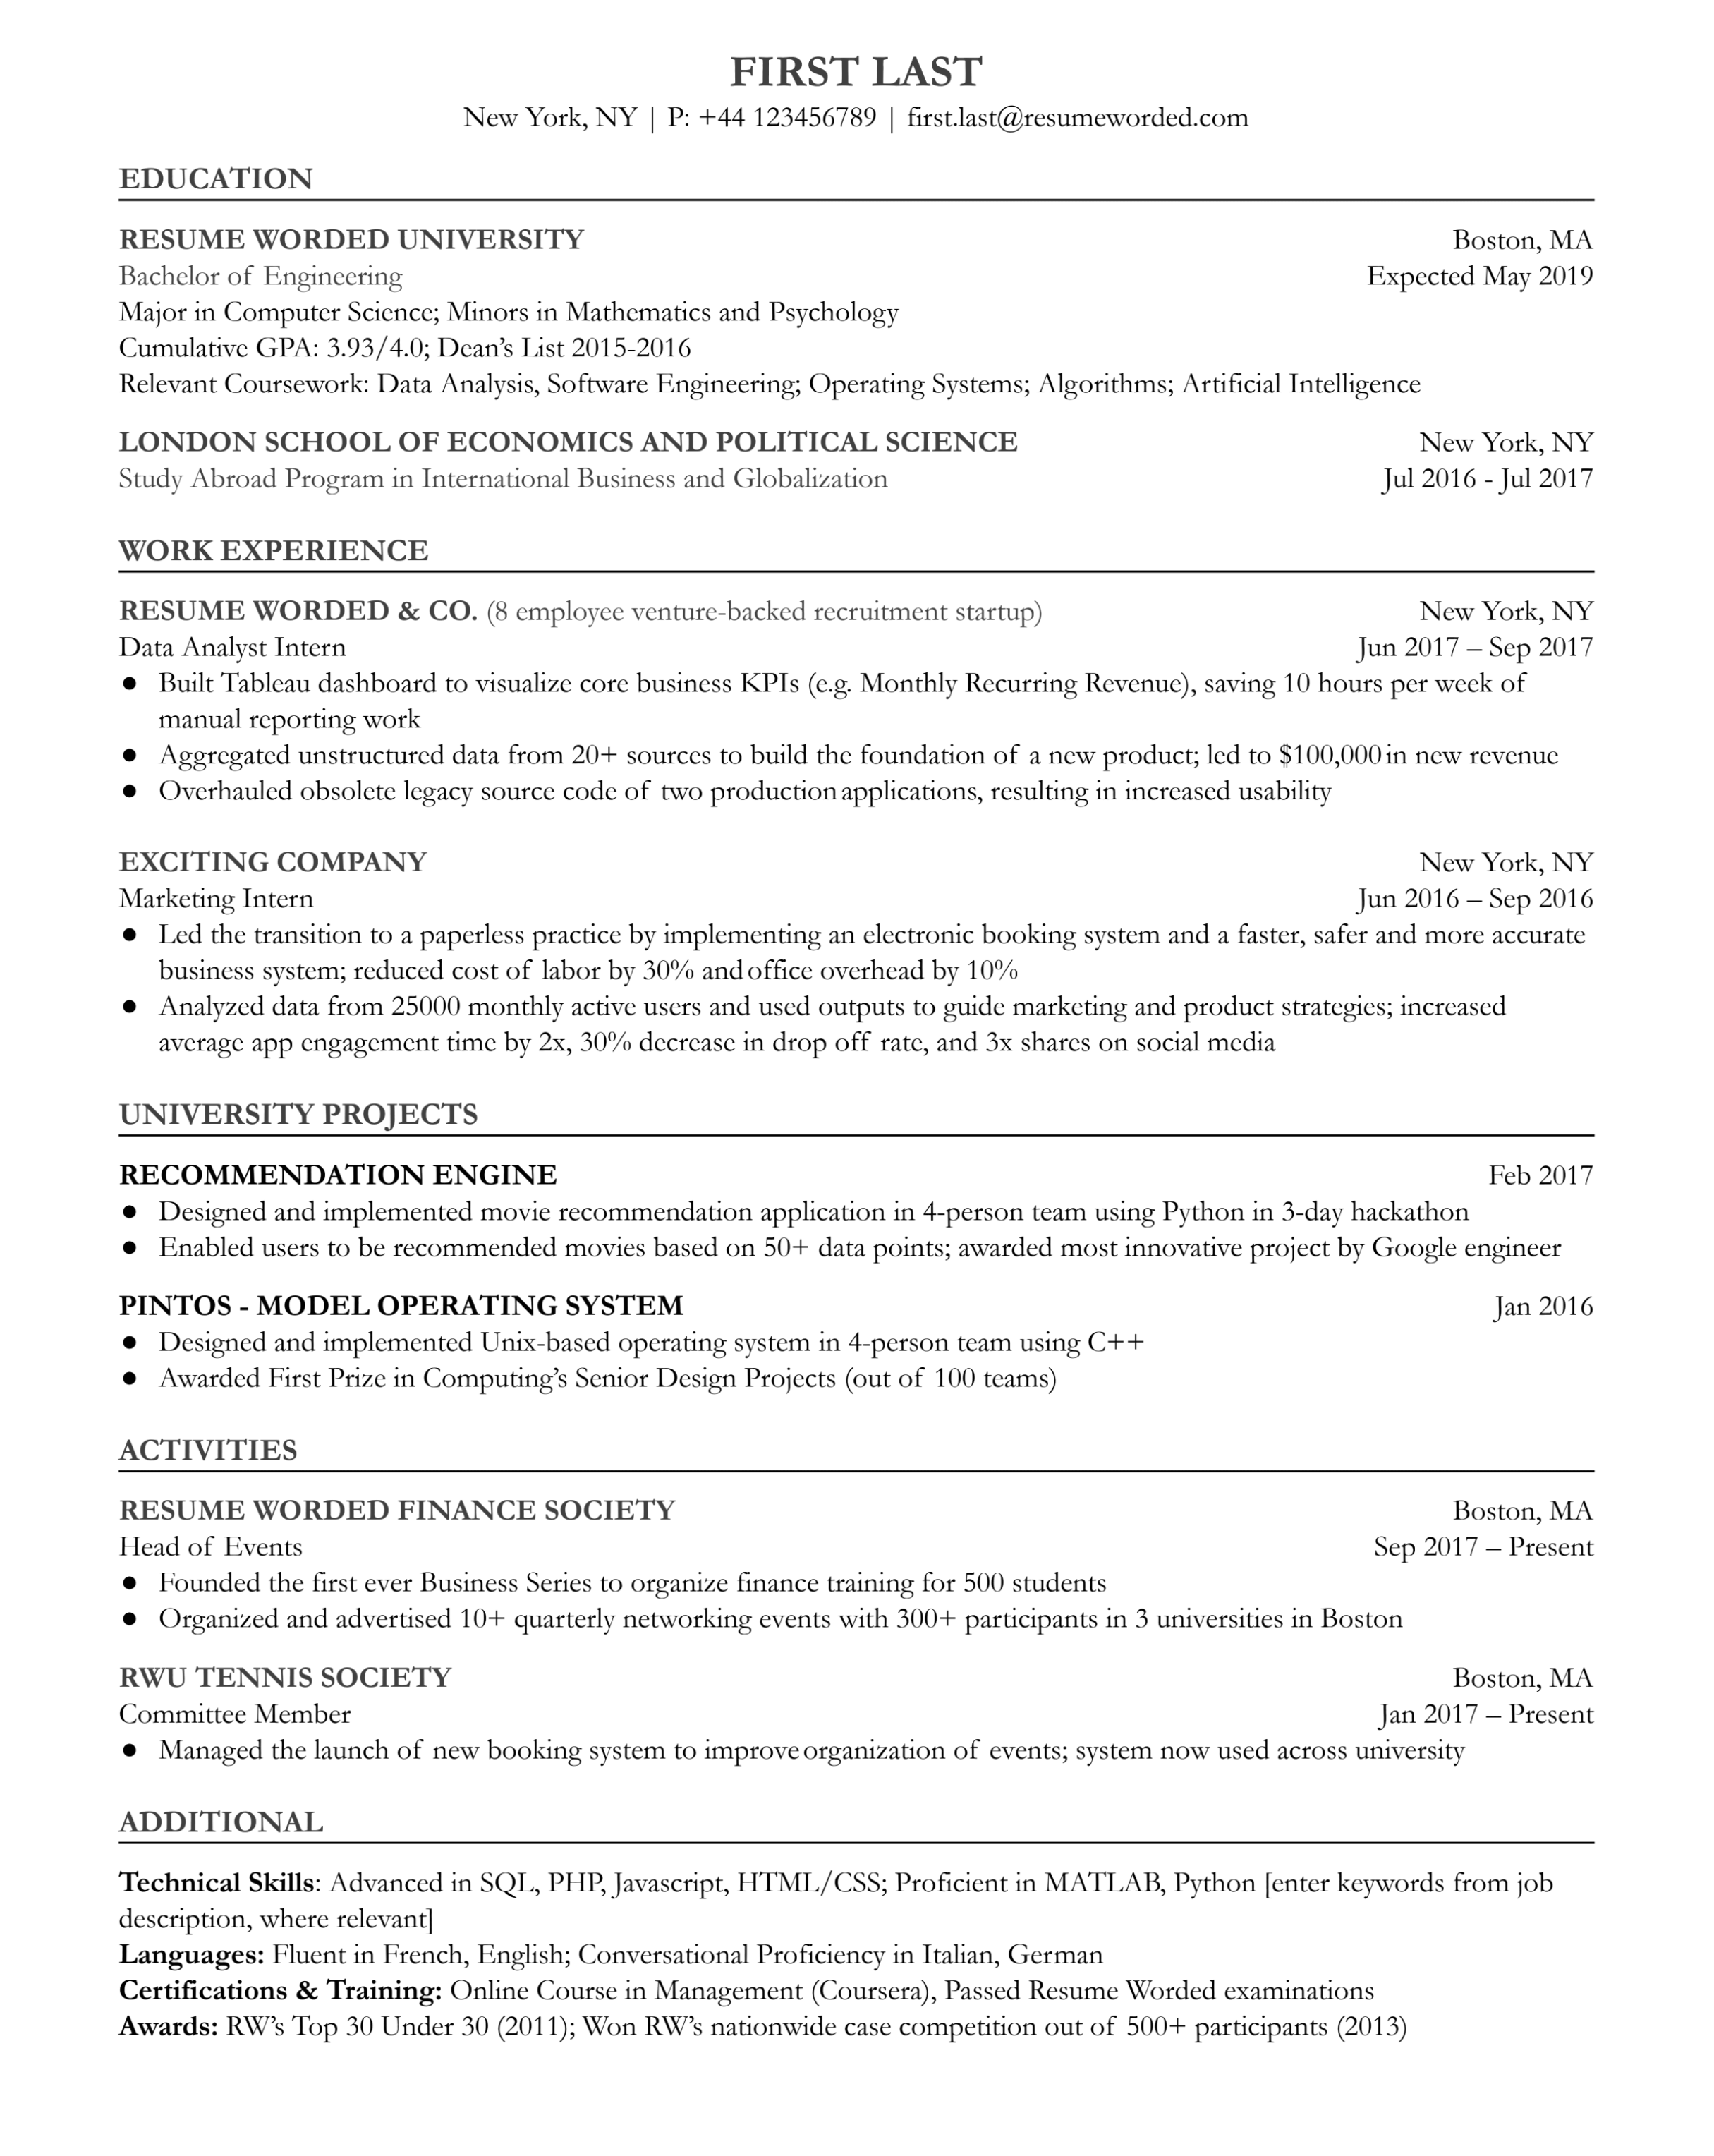 Entry-level data analyst resume showcasing technical skills and relevant coursework